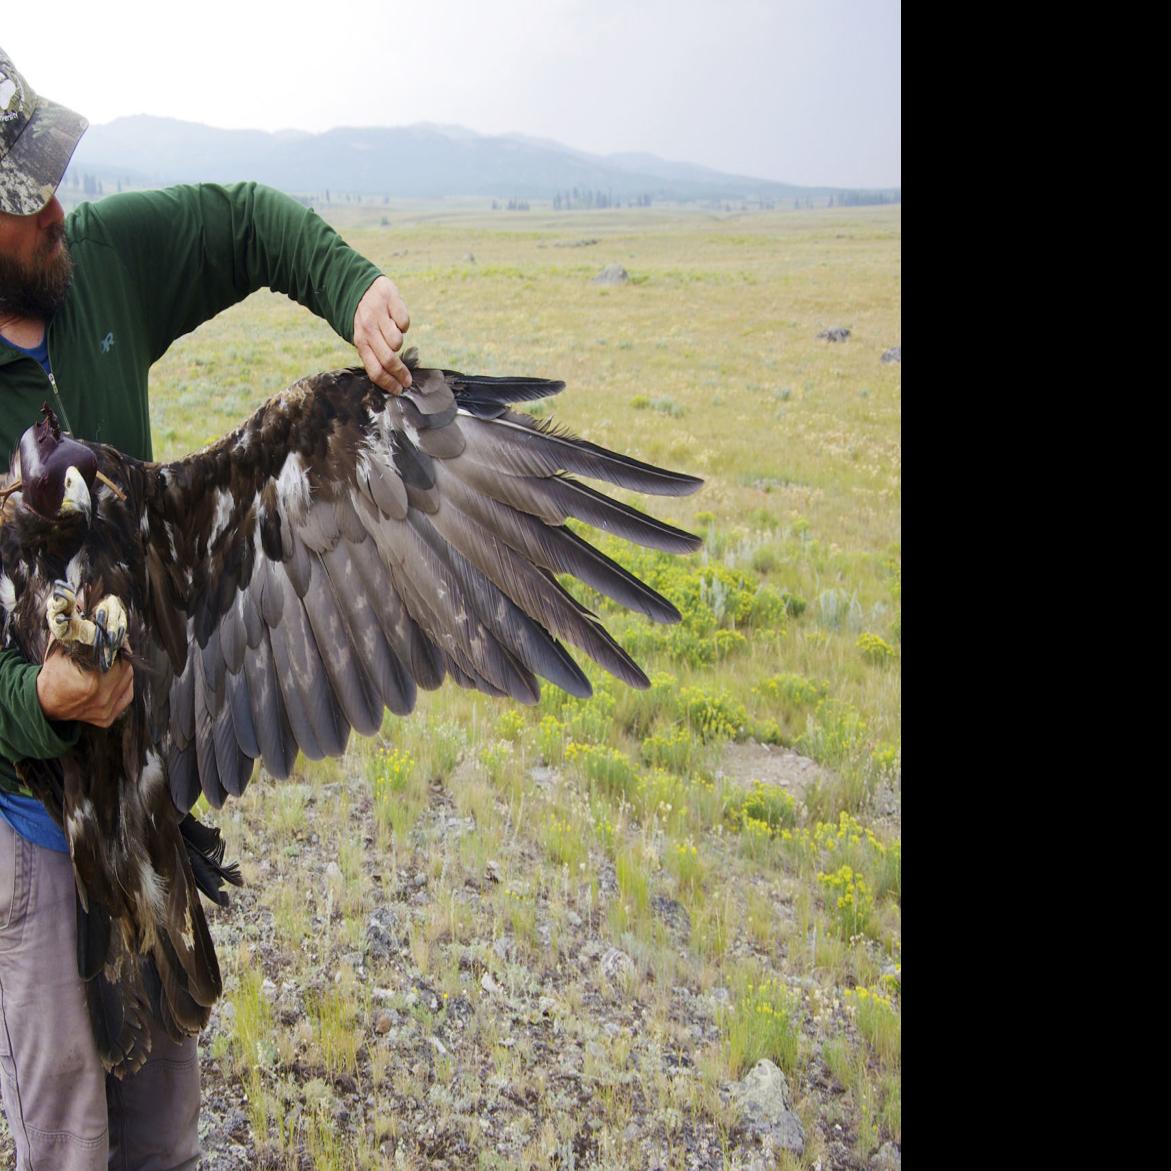 Lead Kills 1st Yellowstone Golden Eagle Fitted With Tracker